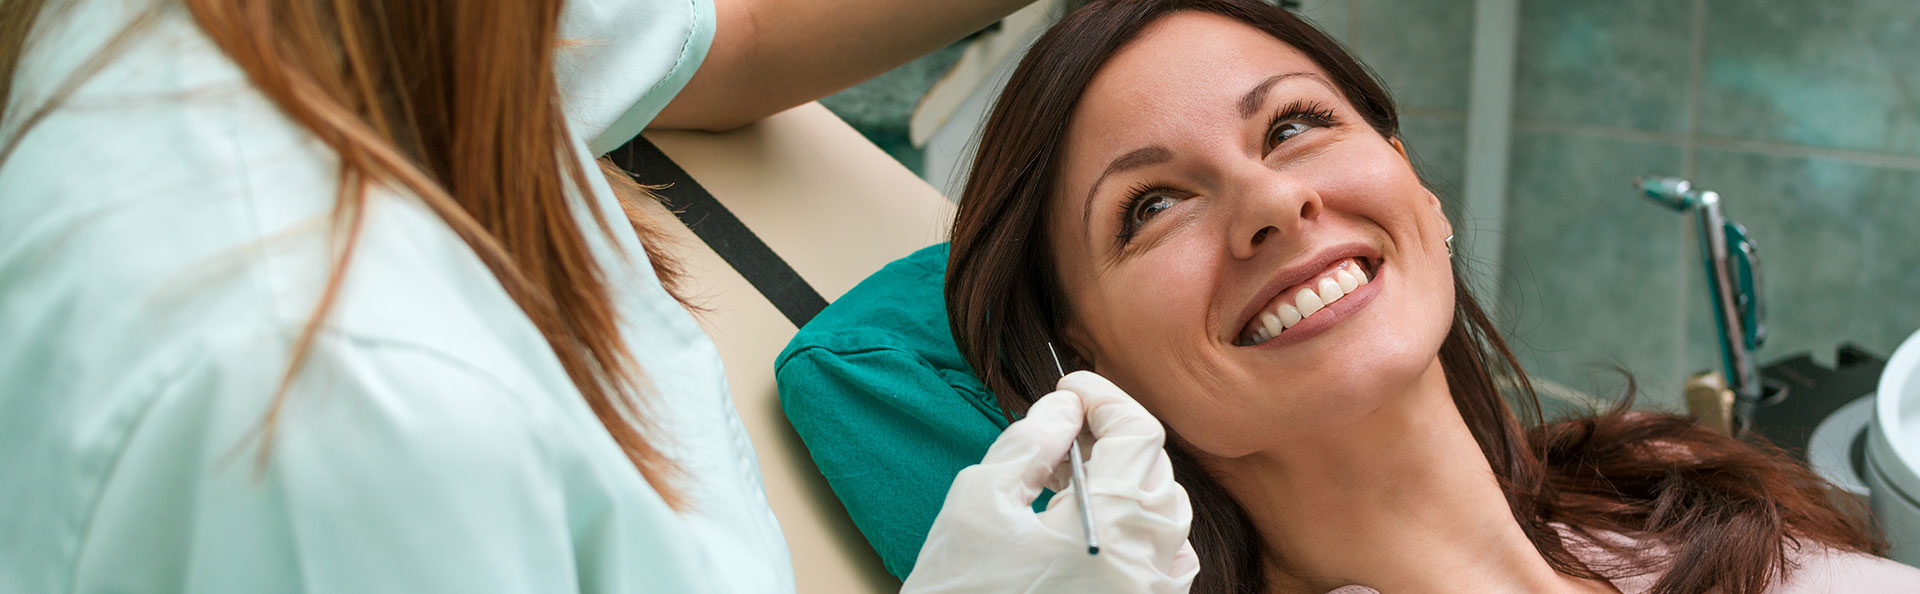 Beautiful woman smiling after dental emergency